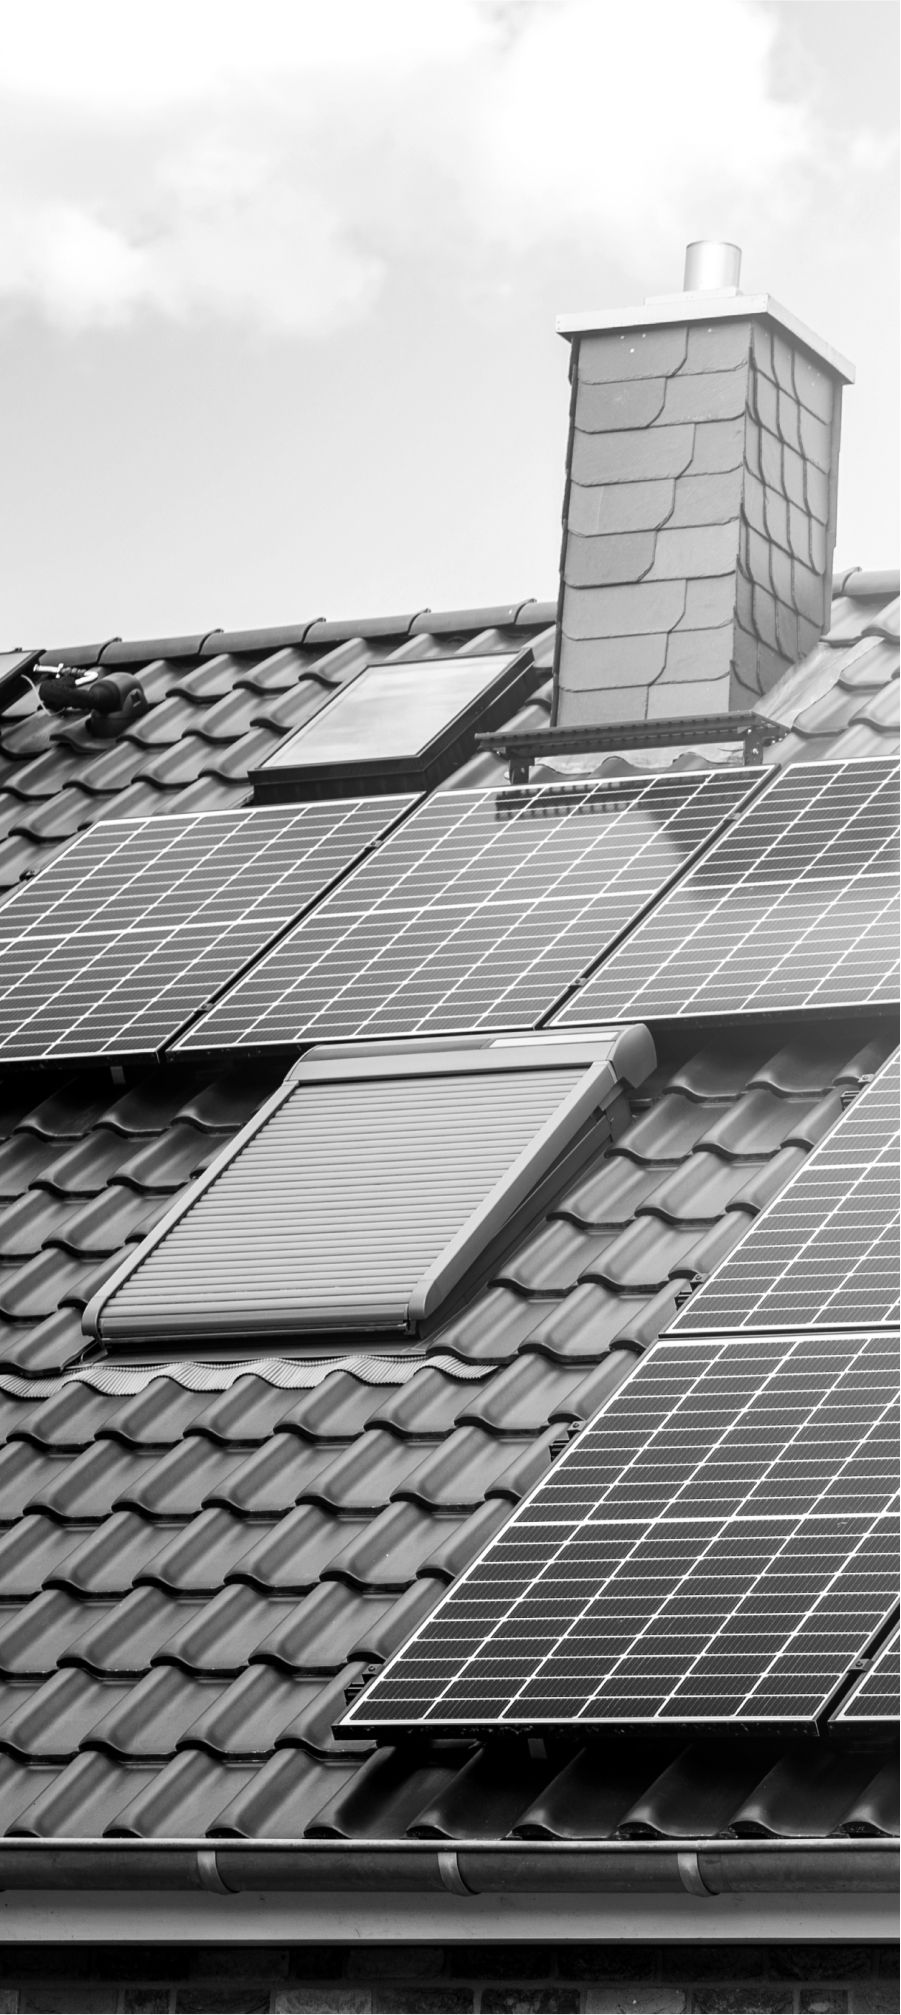 A home roof with Solar Panels installed